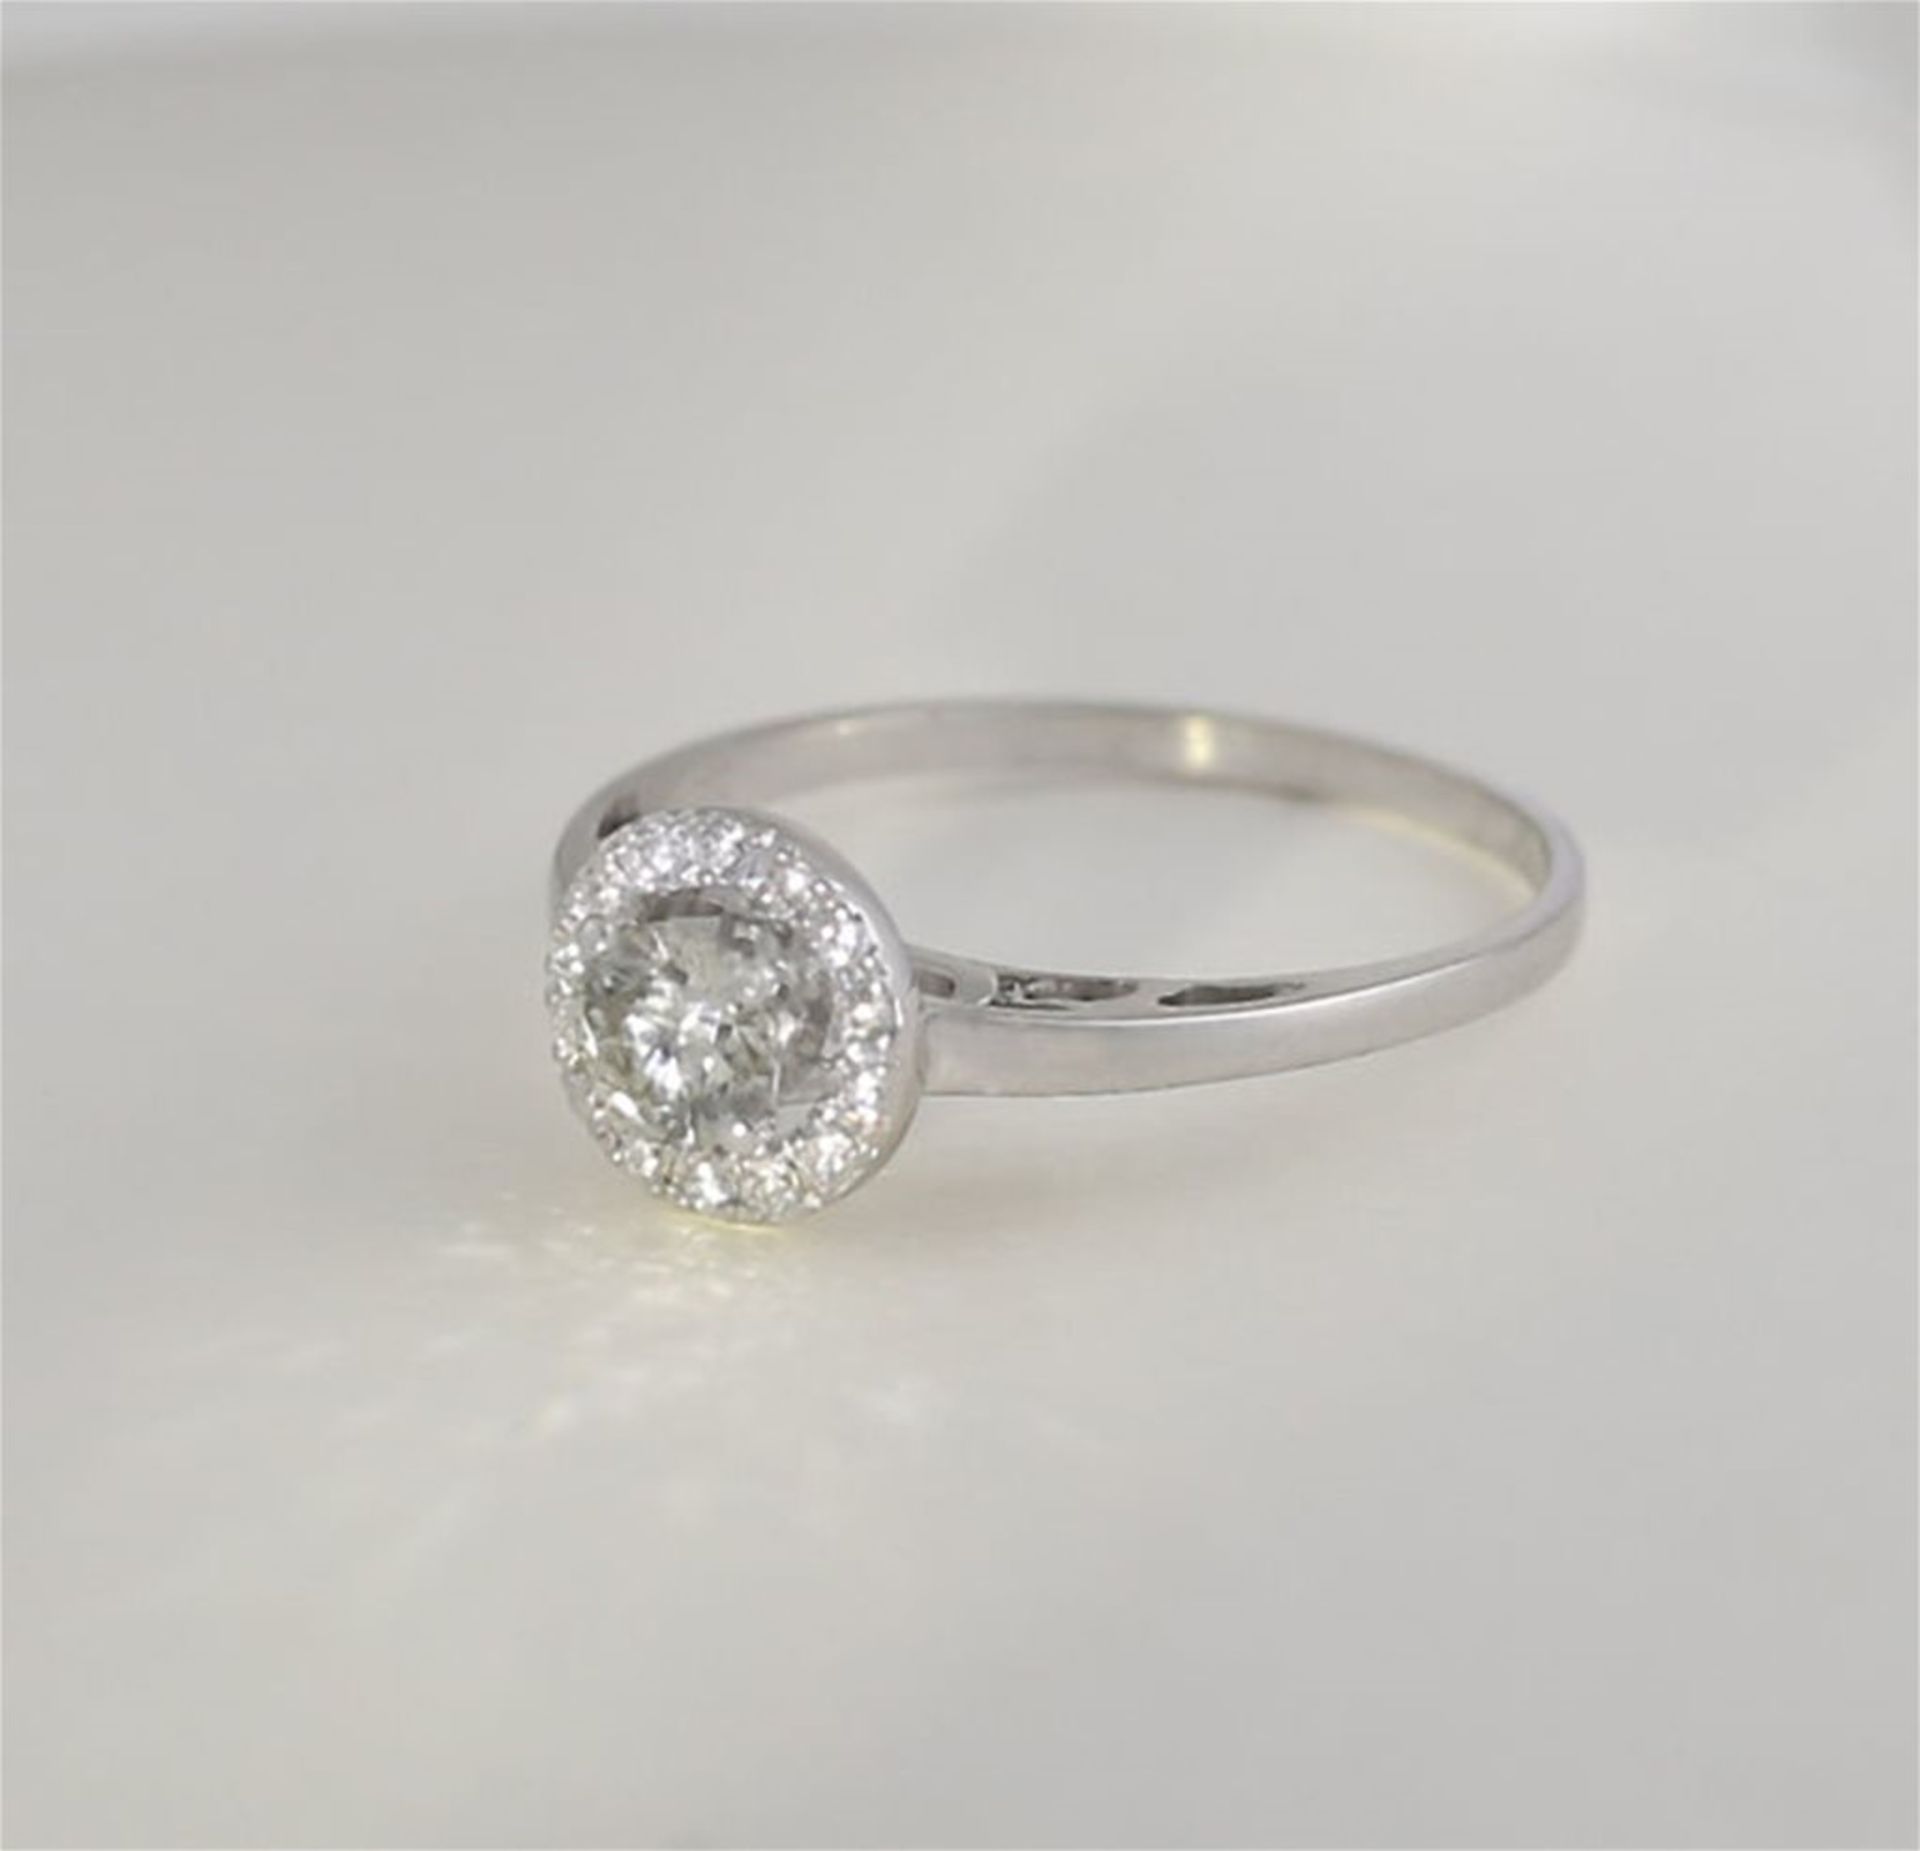 14 K / 585 White Gold Solitaire Diamond Ring - Image 2 of 7